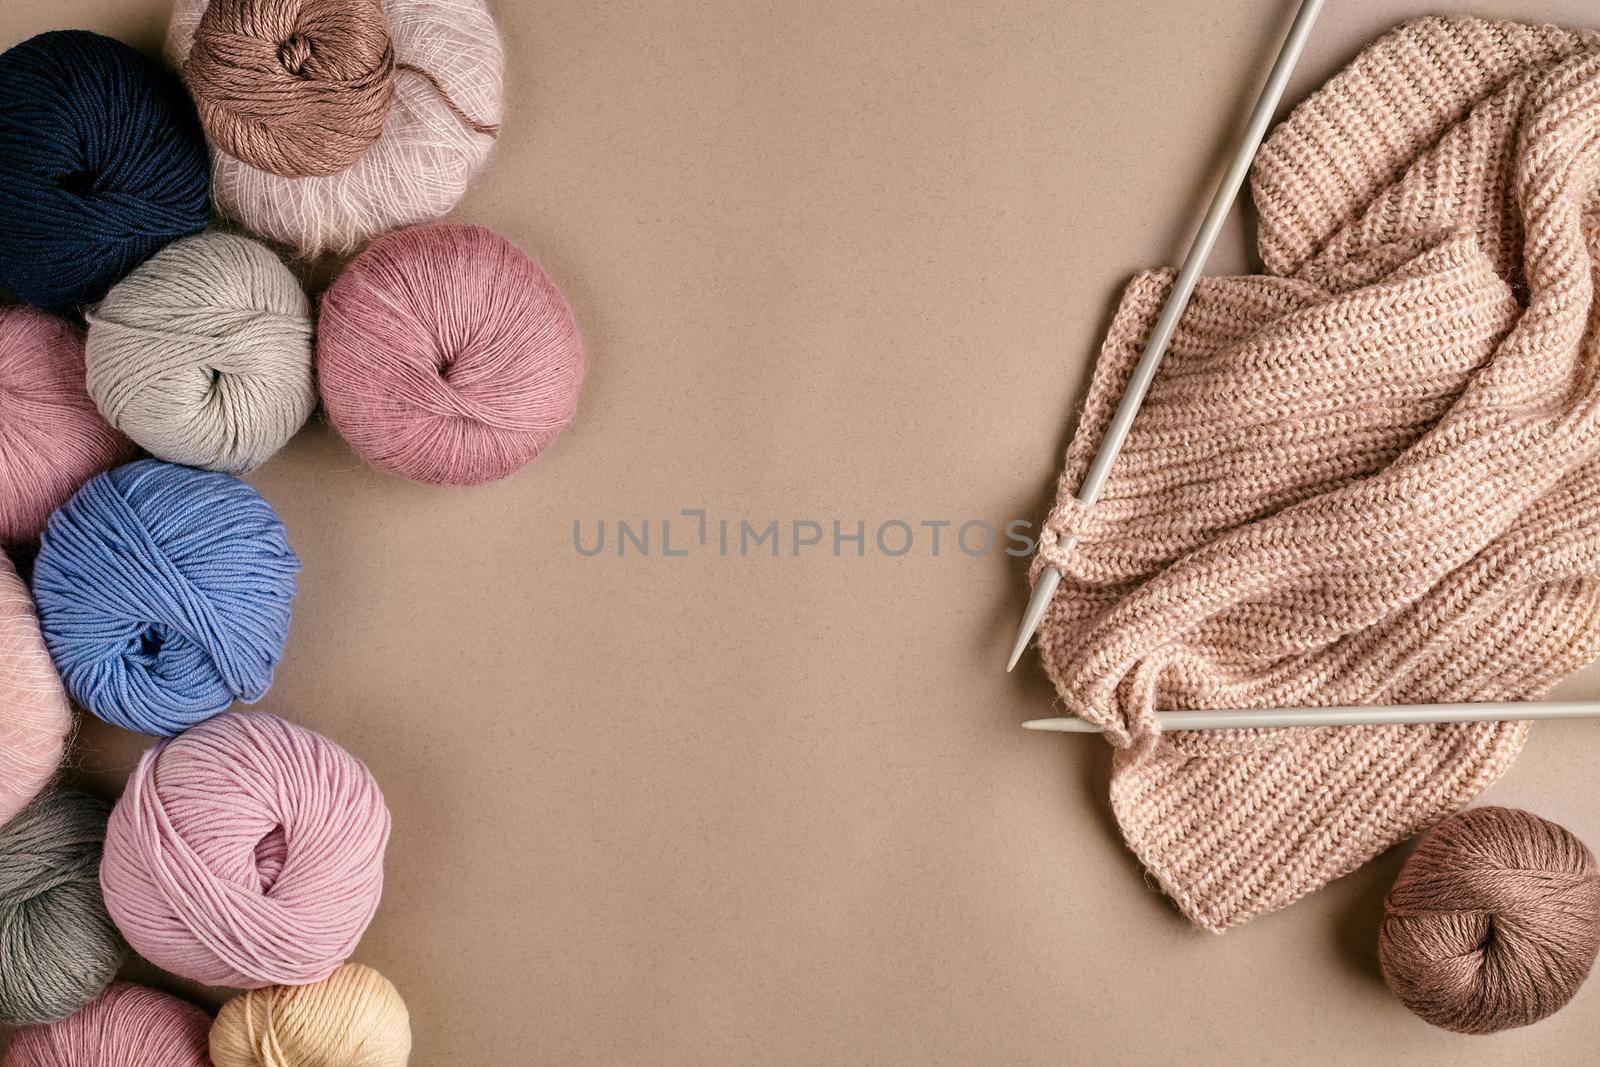 Set of colorful wool yarn and knitting on knitting needles on beige background. Knitting as a kind of needlework. Colorful balls of yarn and knitting needles. Top view. Still life. Copy space. Flat lay